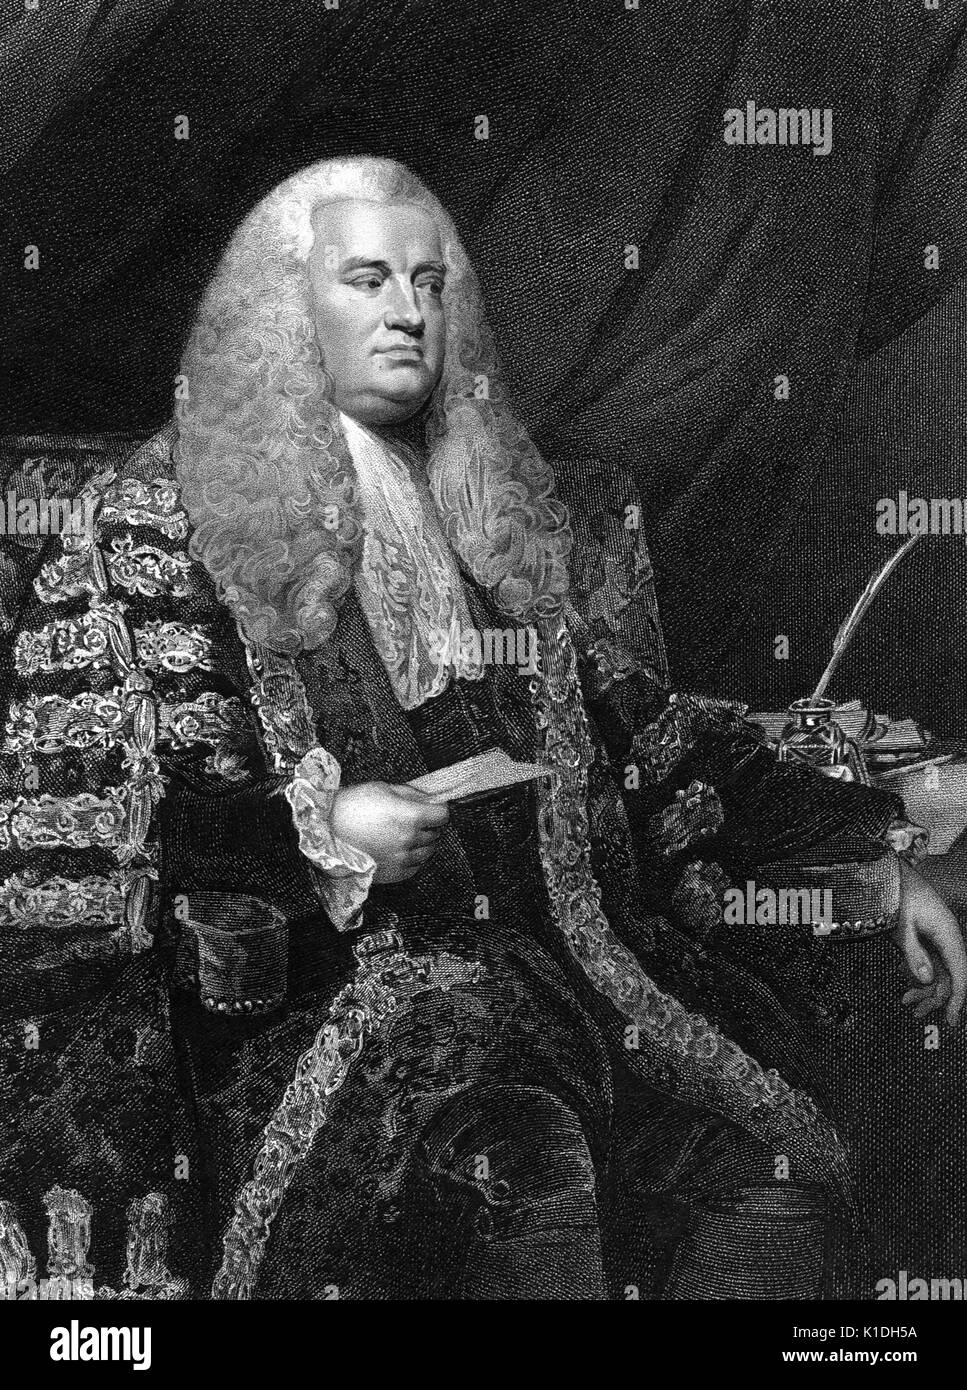 John Dunning, Lord Ashburton, 1750. From the New York Public Library. Stock Photo